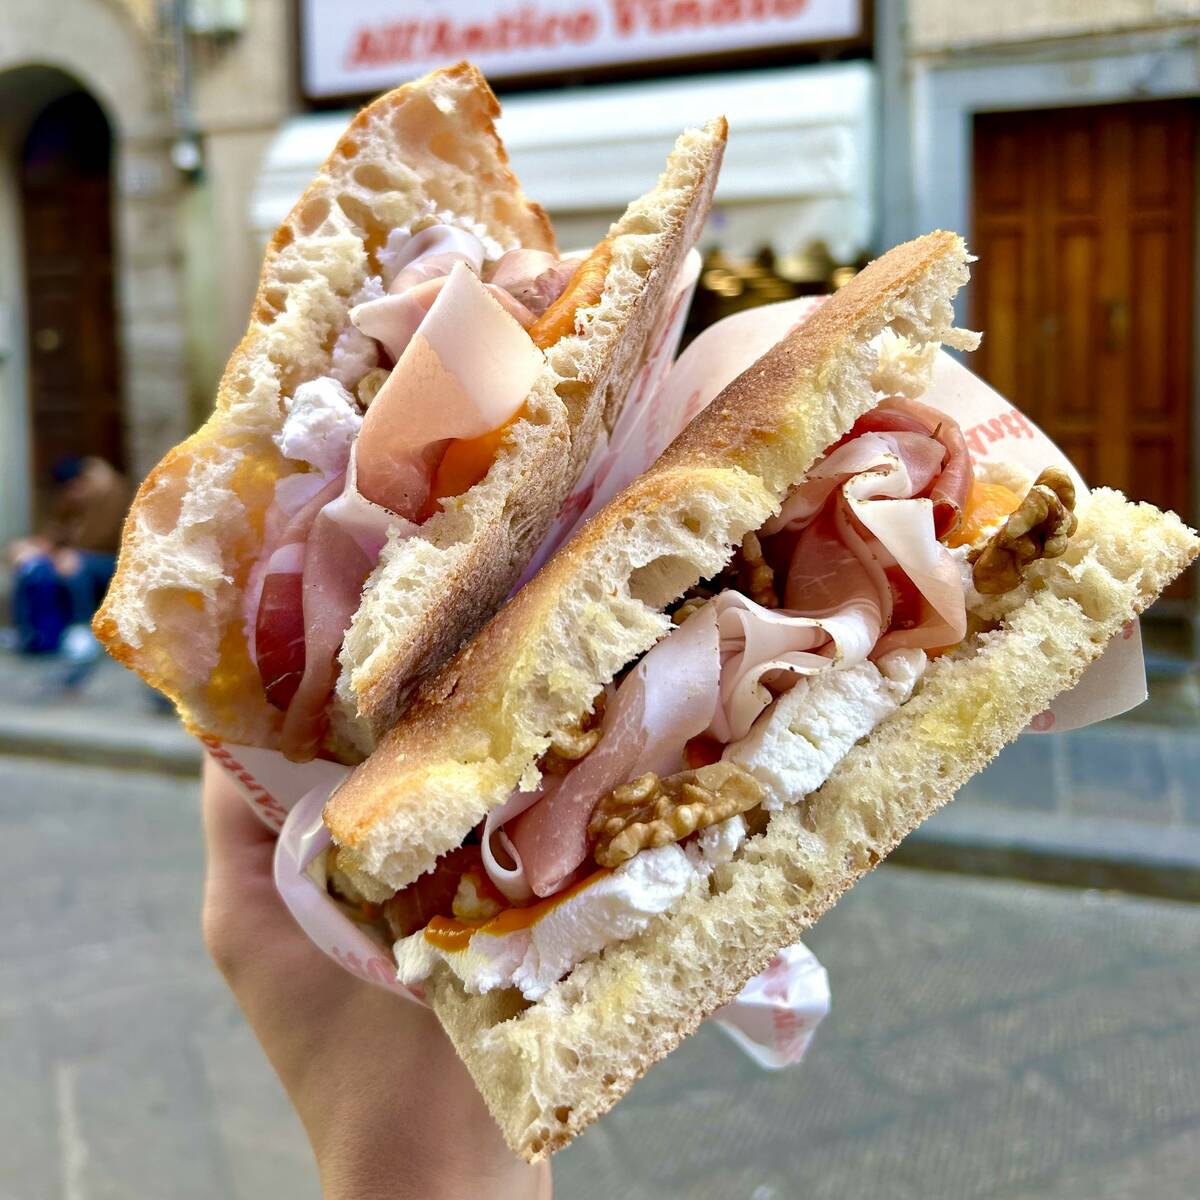 Sandwiches from All'Antico Vinaio, often called the world's best sandwich shop. The store, foun ...